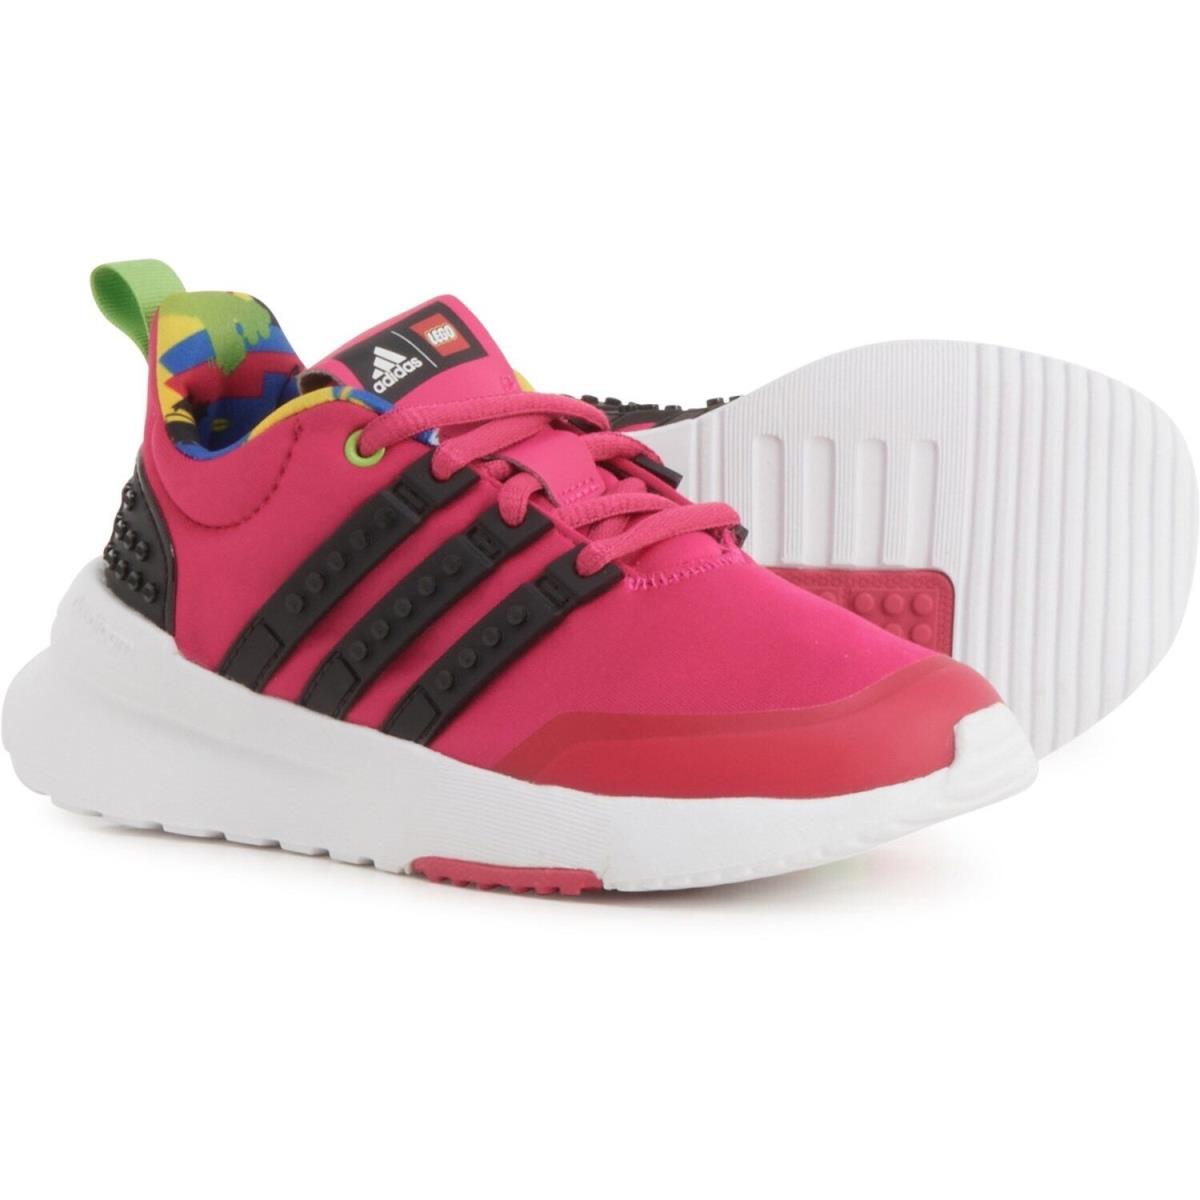 Adidas Racer TR x Lego Youth Size 6.5 Pink/blk 3-Stripes Lace-up Running Shoes